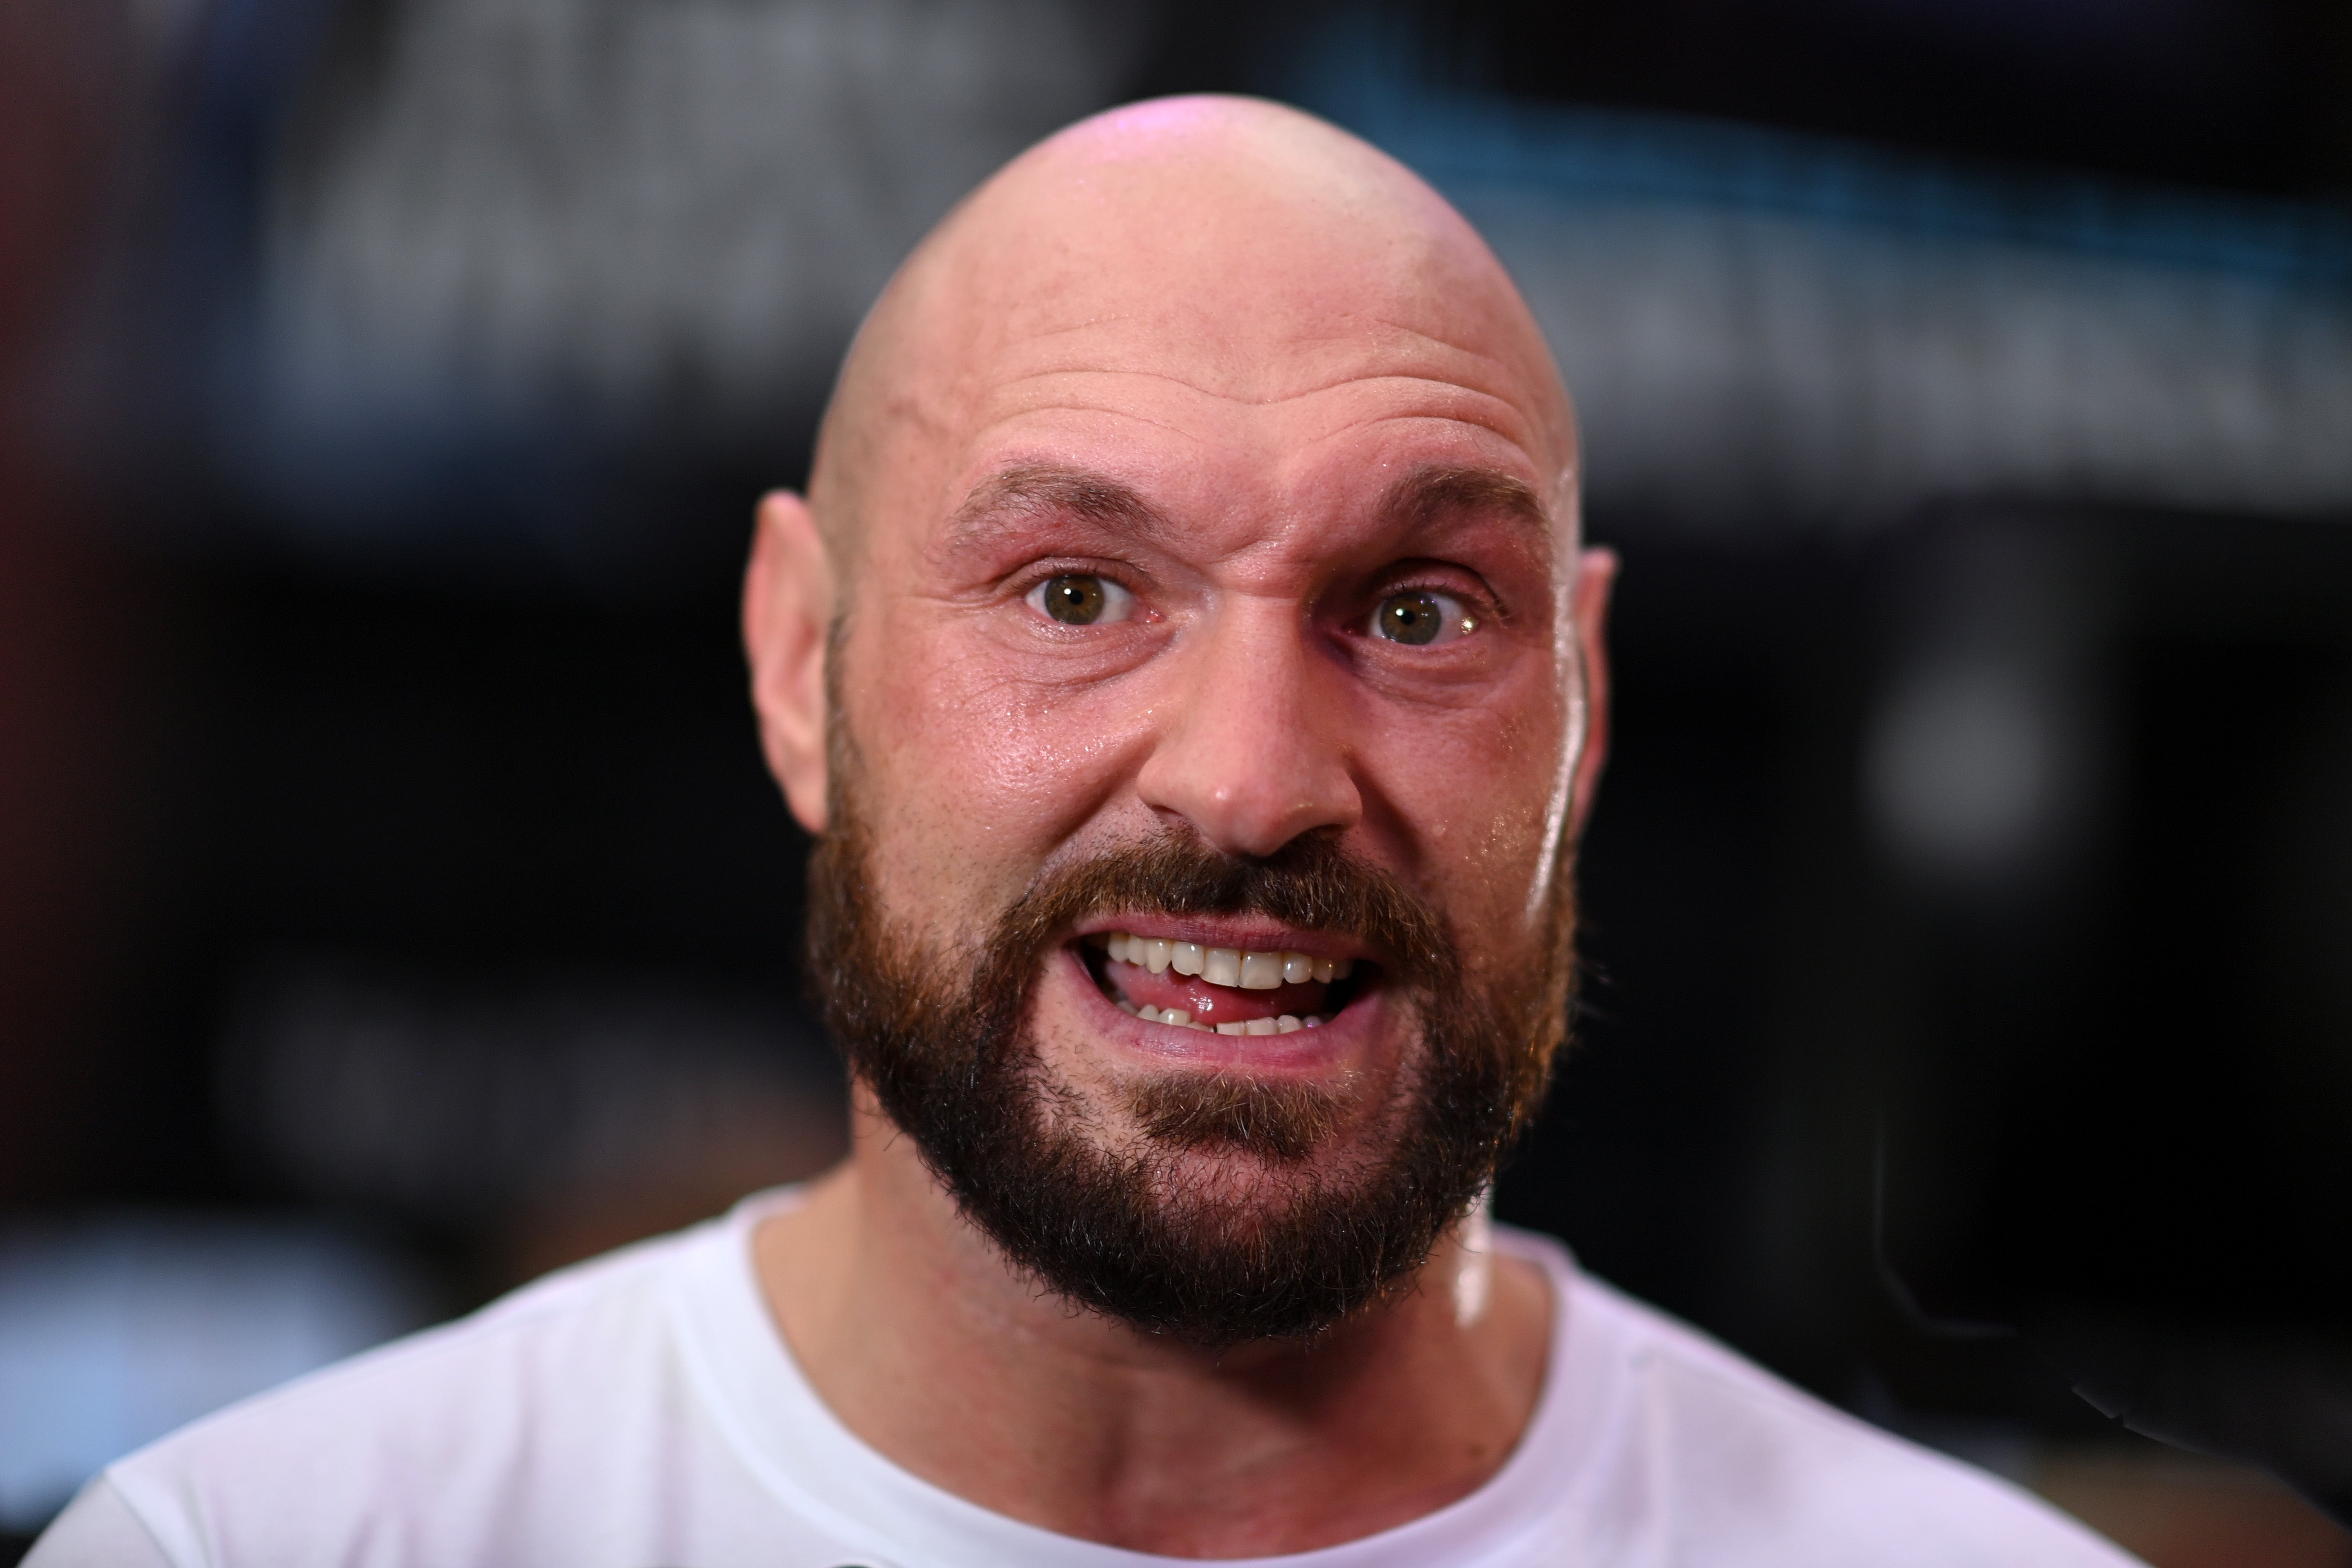 The world heavyweight champion takes on Dillian Whyte on Saturday